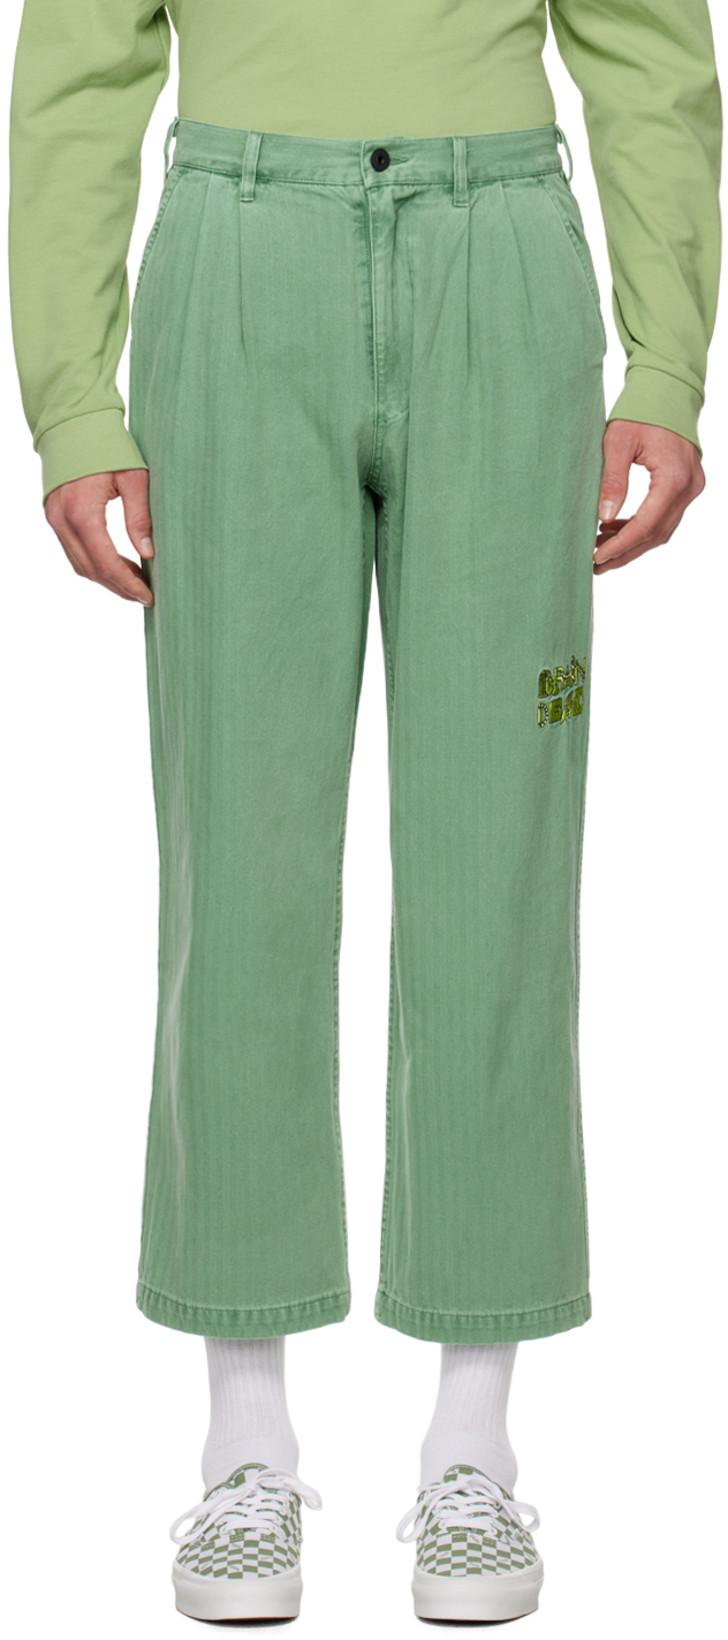 Green Connections Trousers by BRAIN DEAD